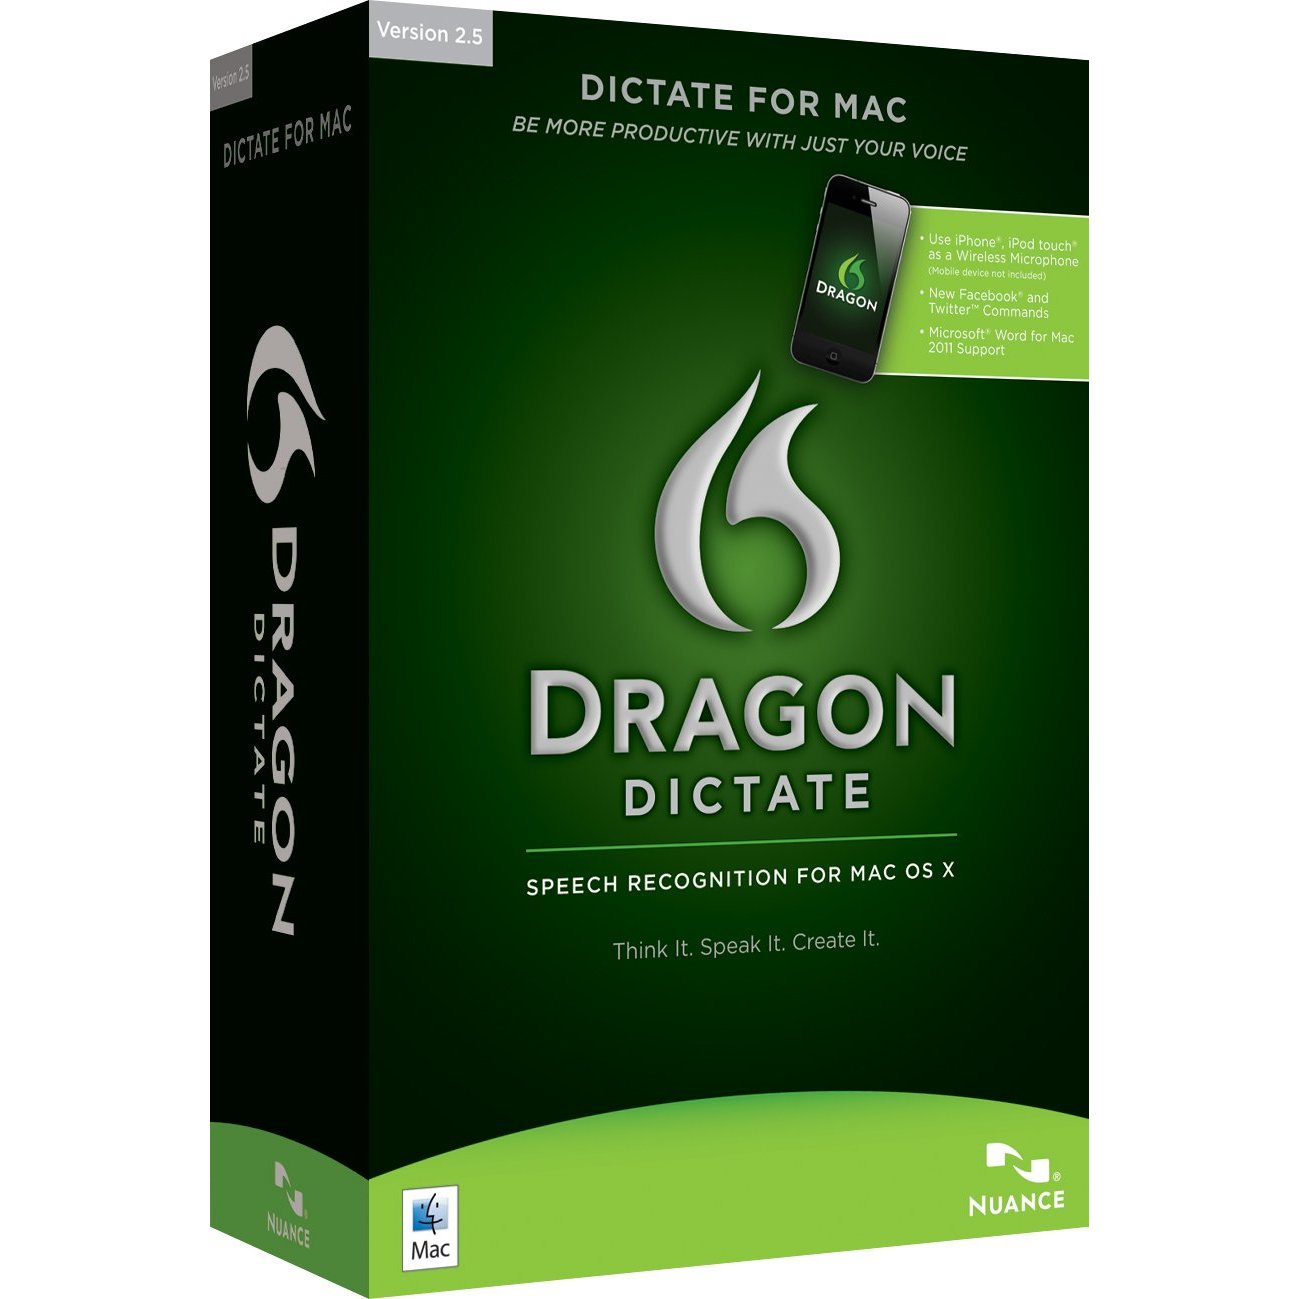 Dragon dictate download free